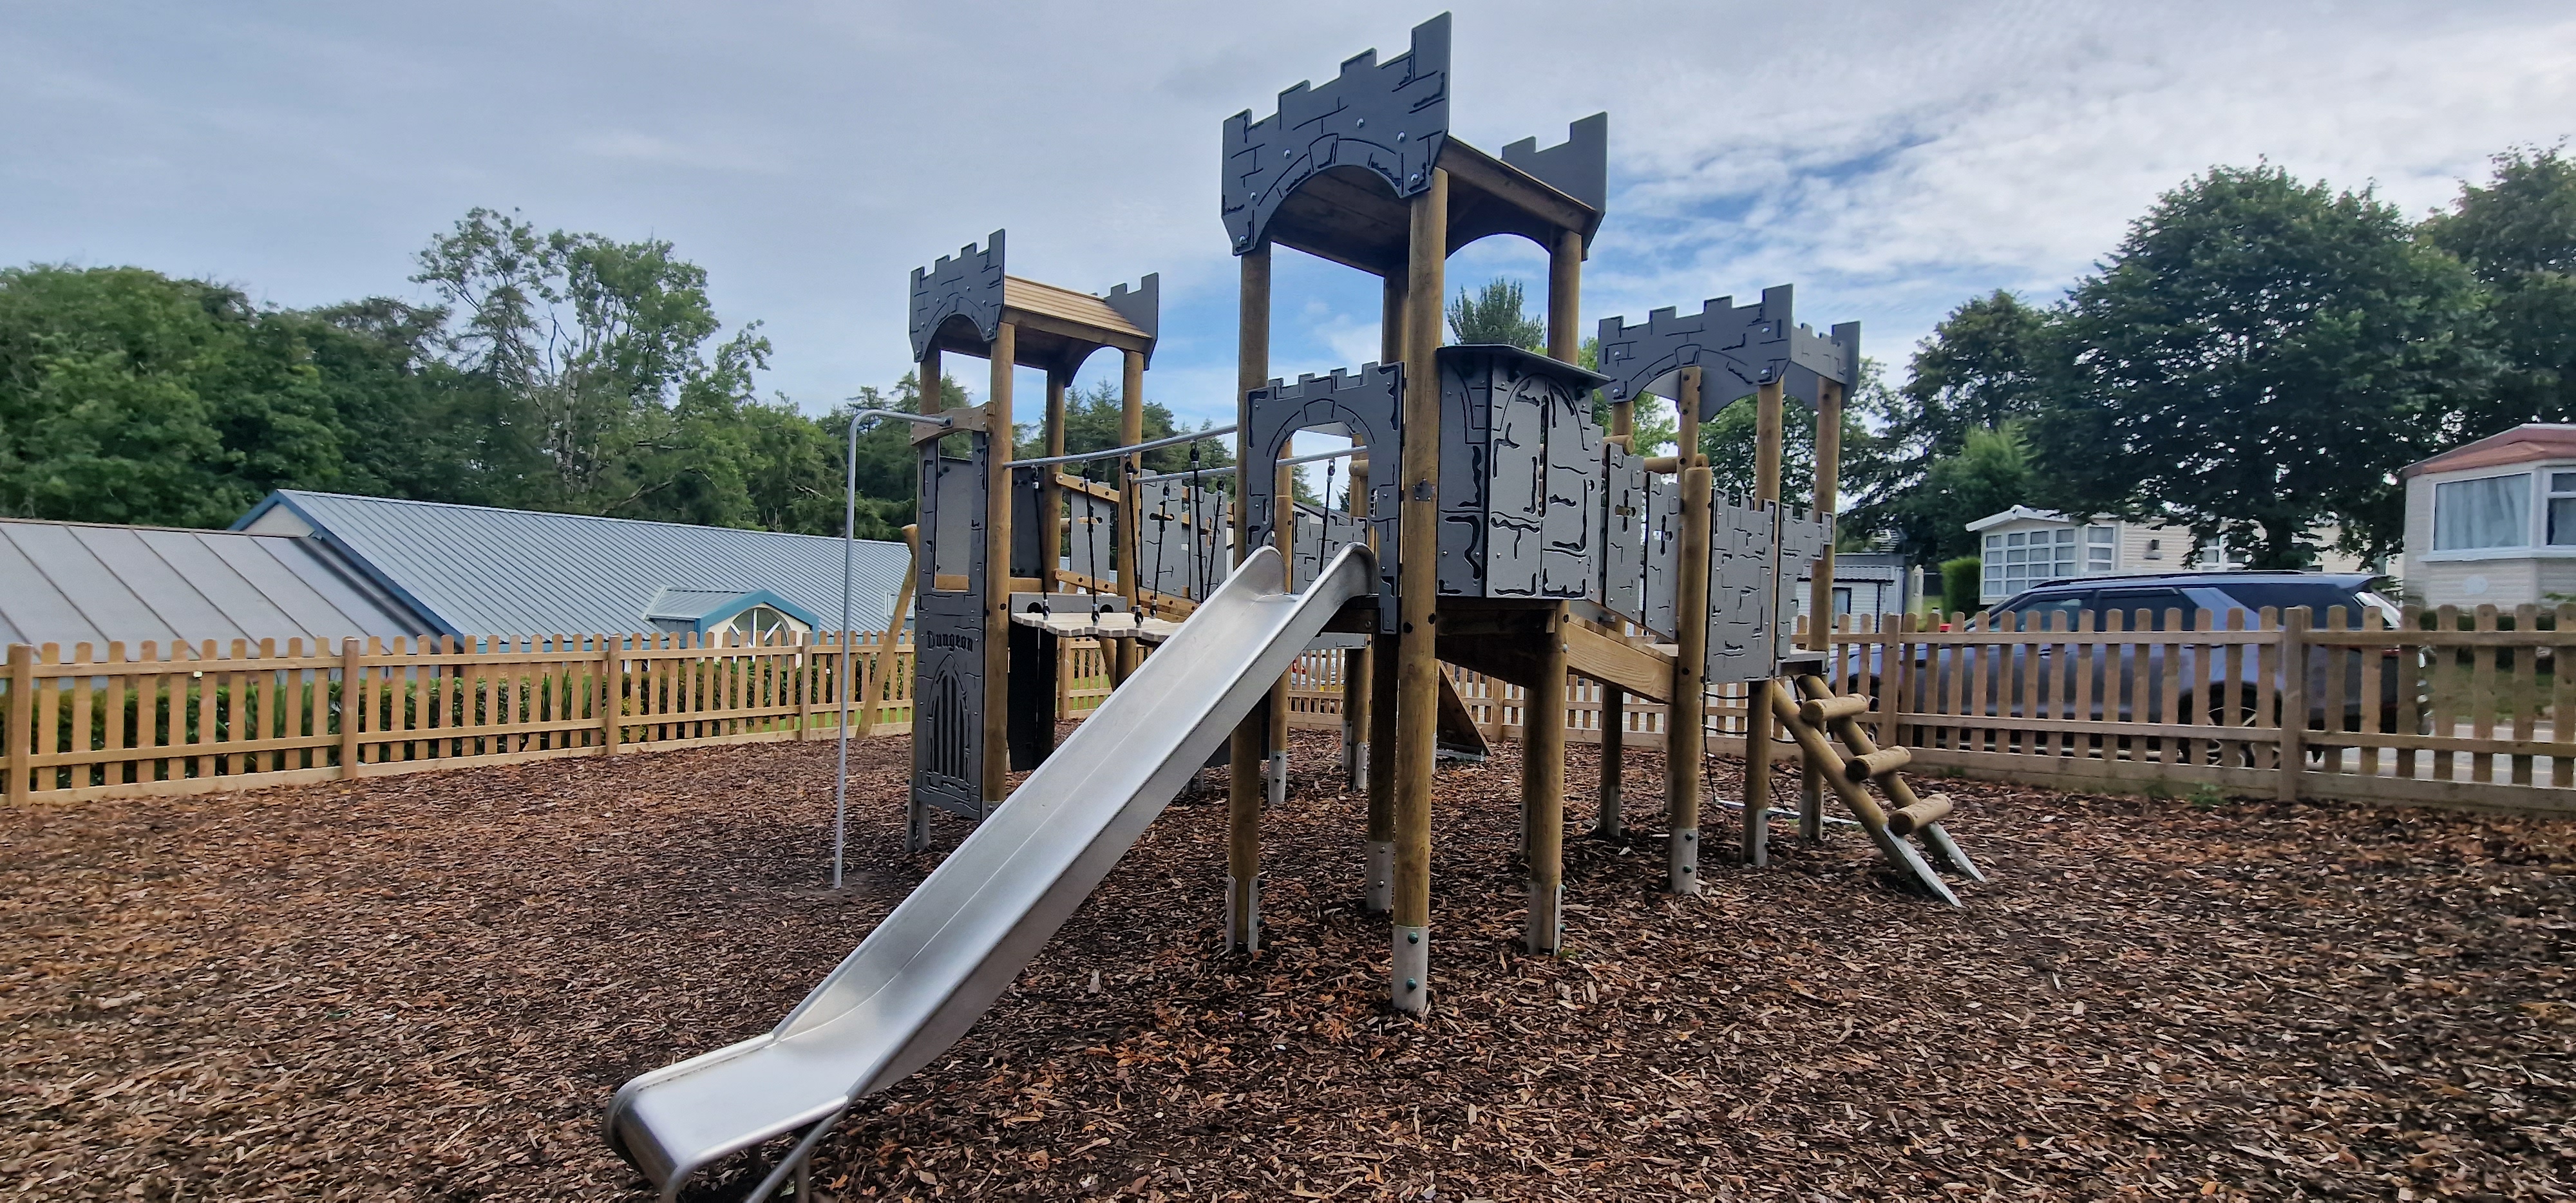 A play tower installed by Pentagon Play at Bryntag holiday park